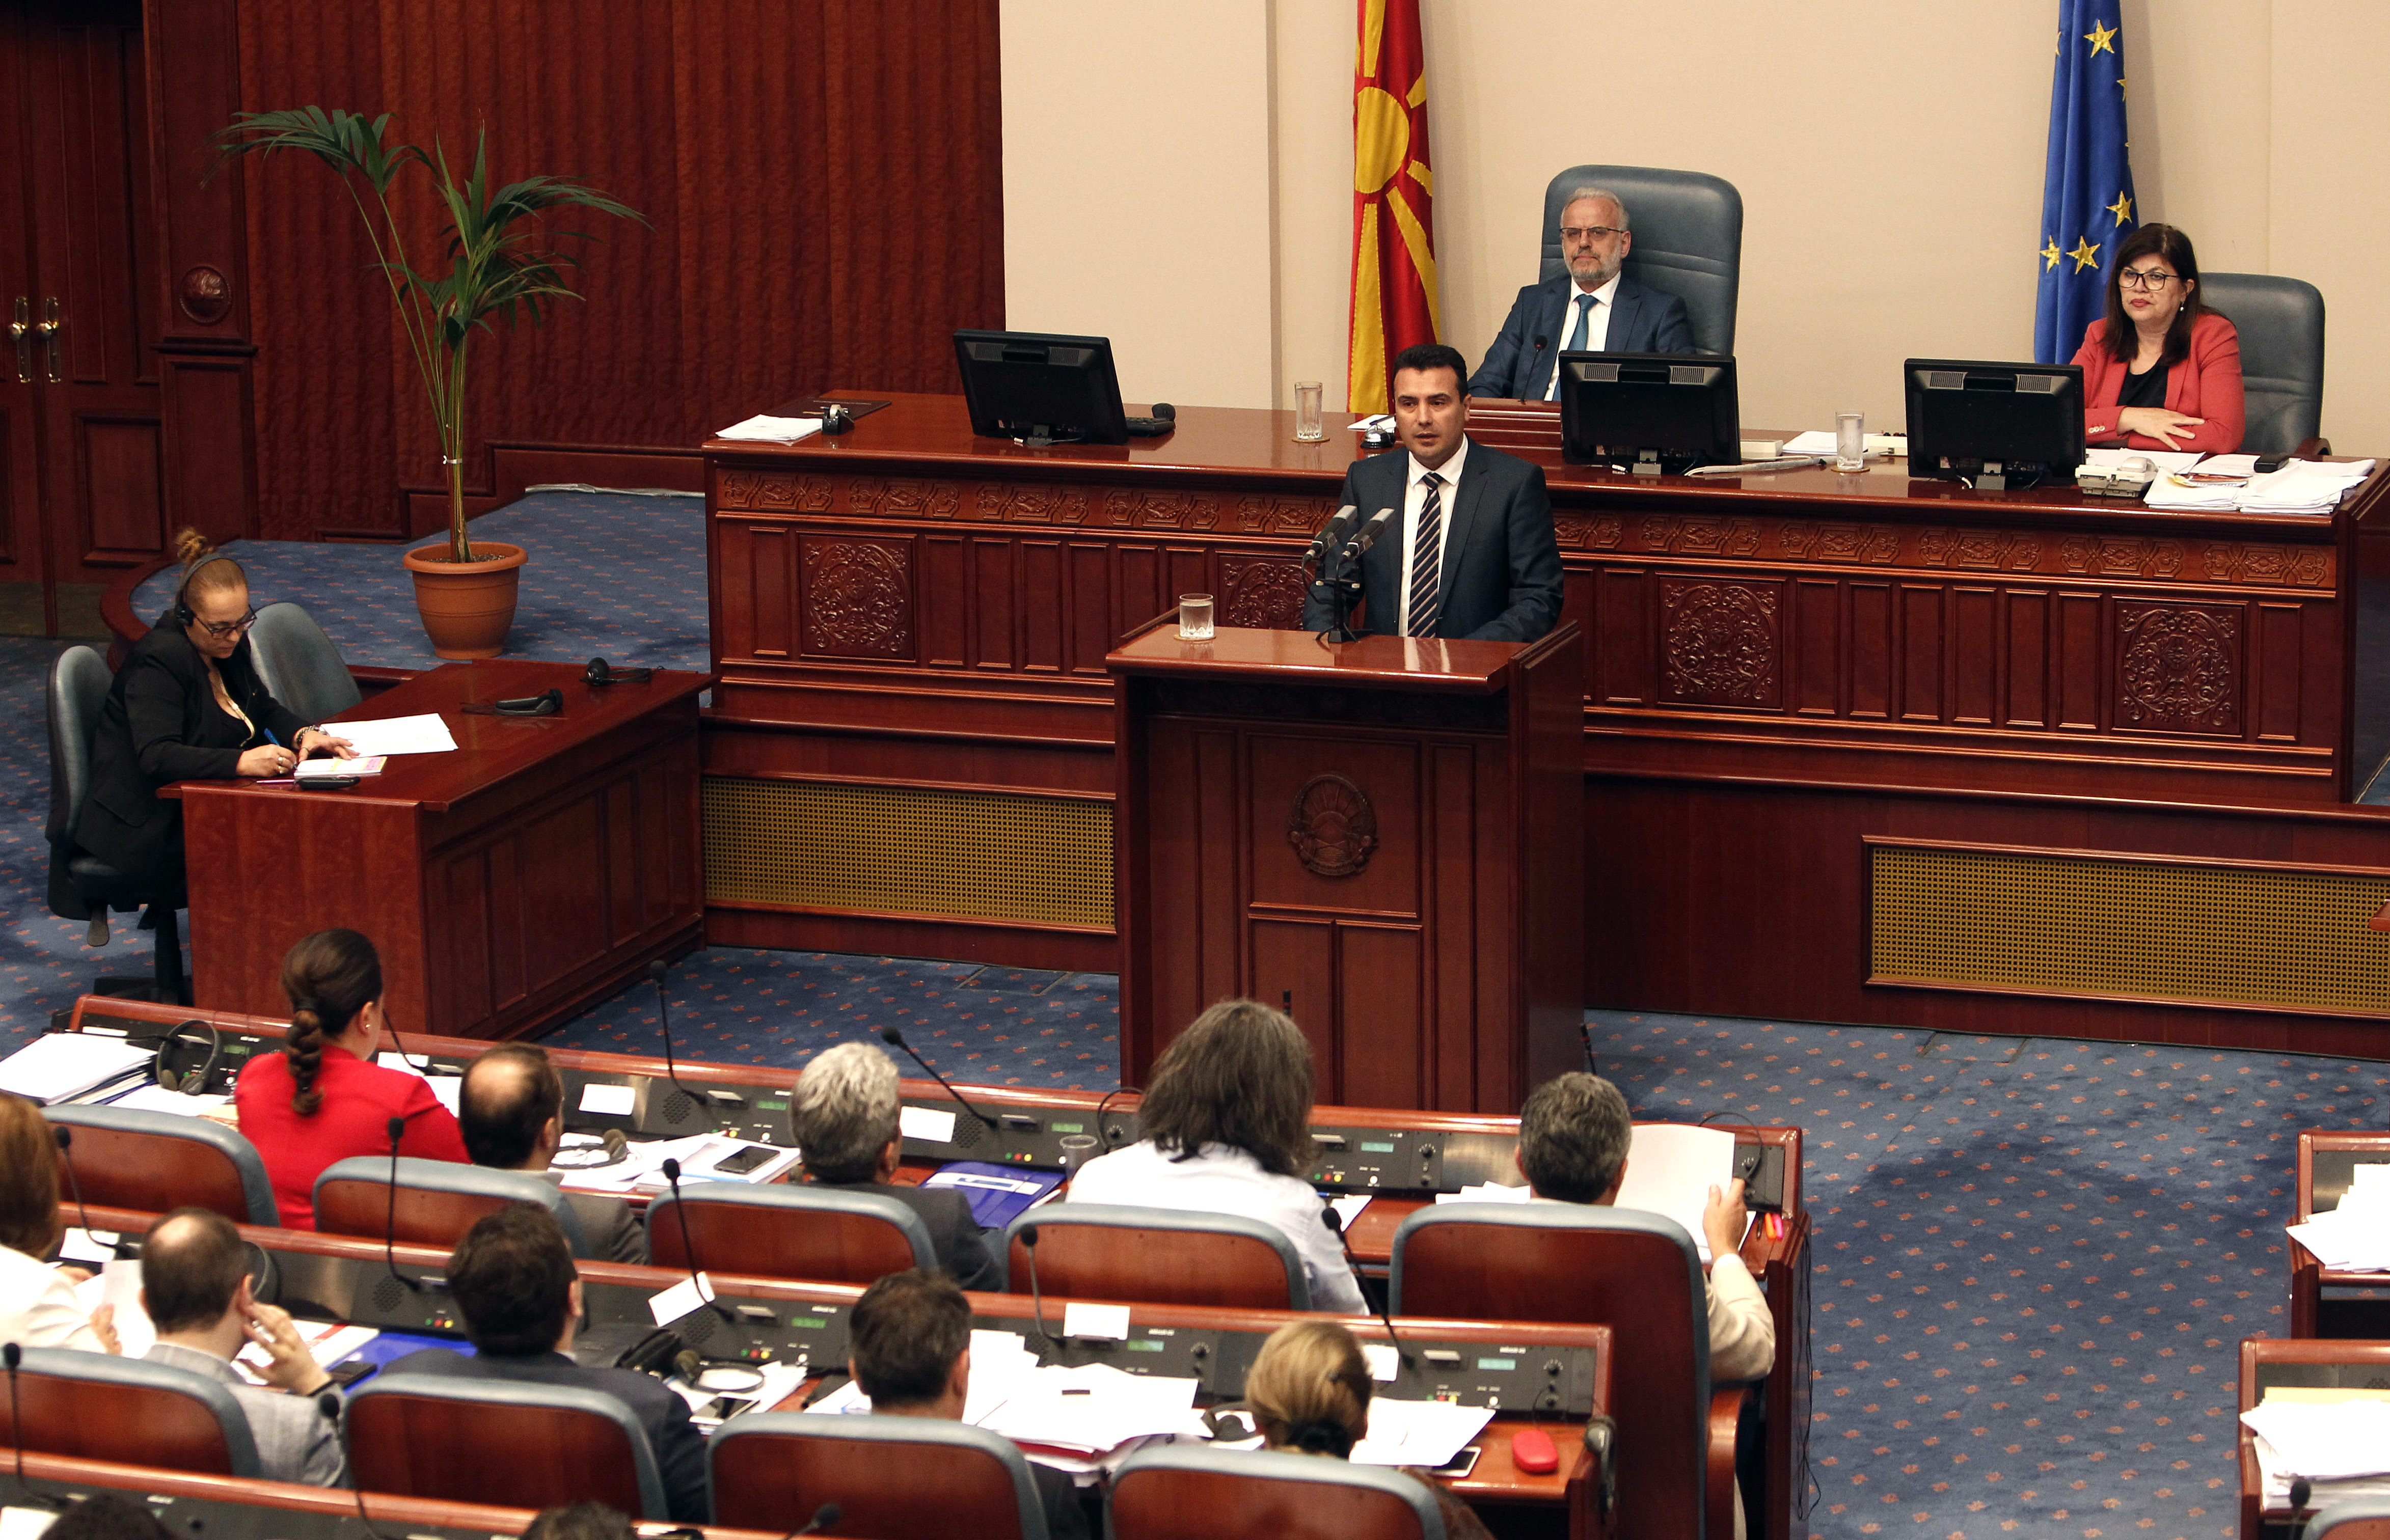 Macedonian PM Zoran Zaev speaks during a session for the ratification of the deal with Greece in the parliament in Skopje